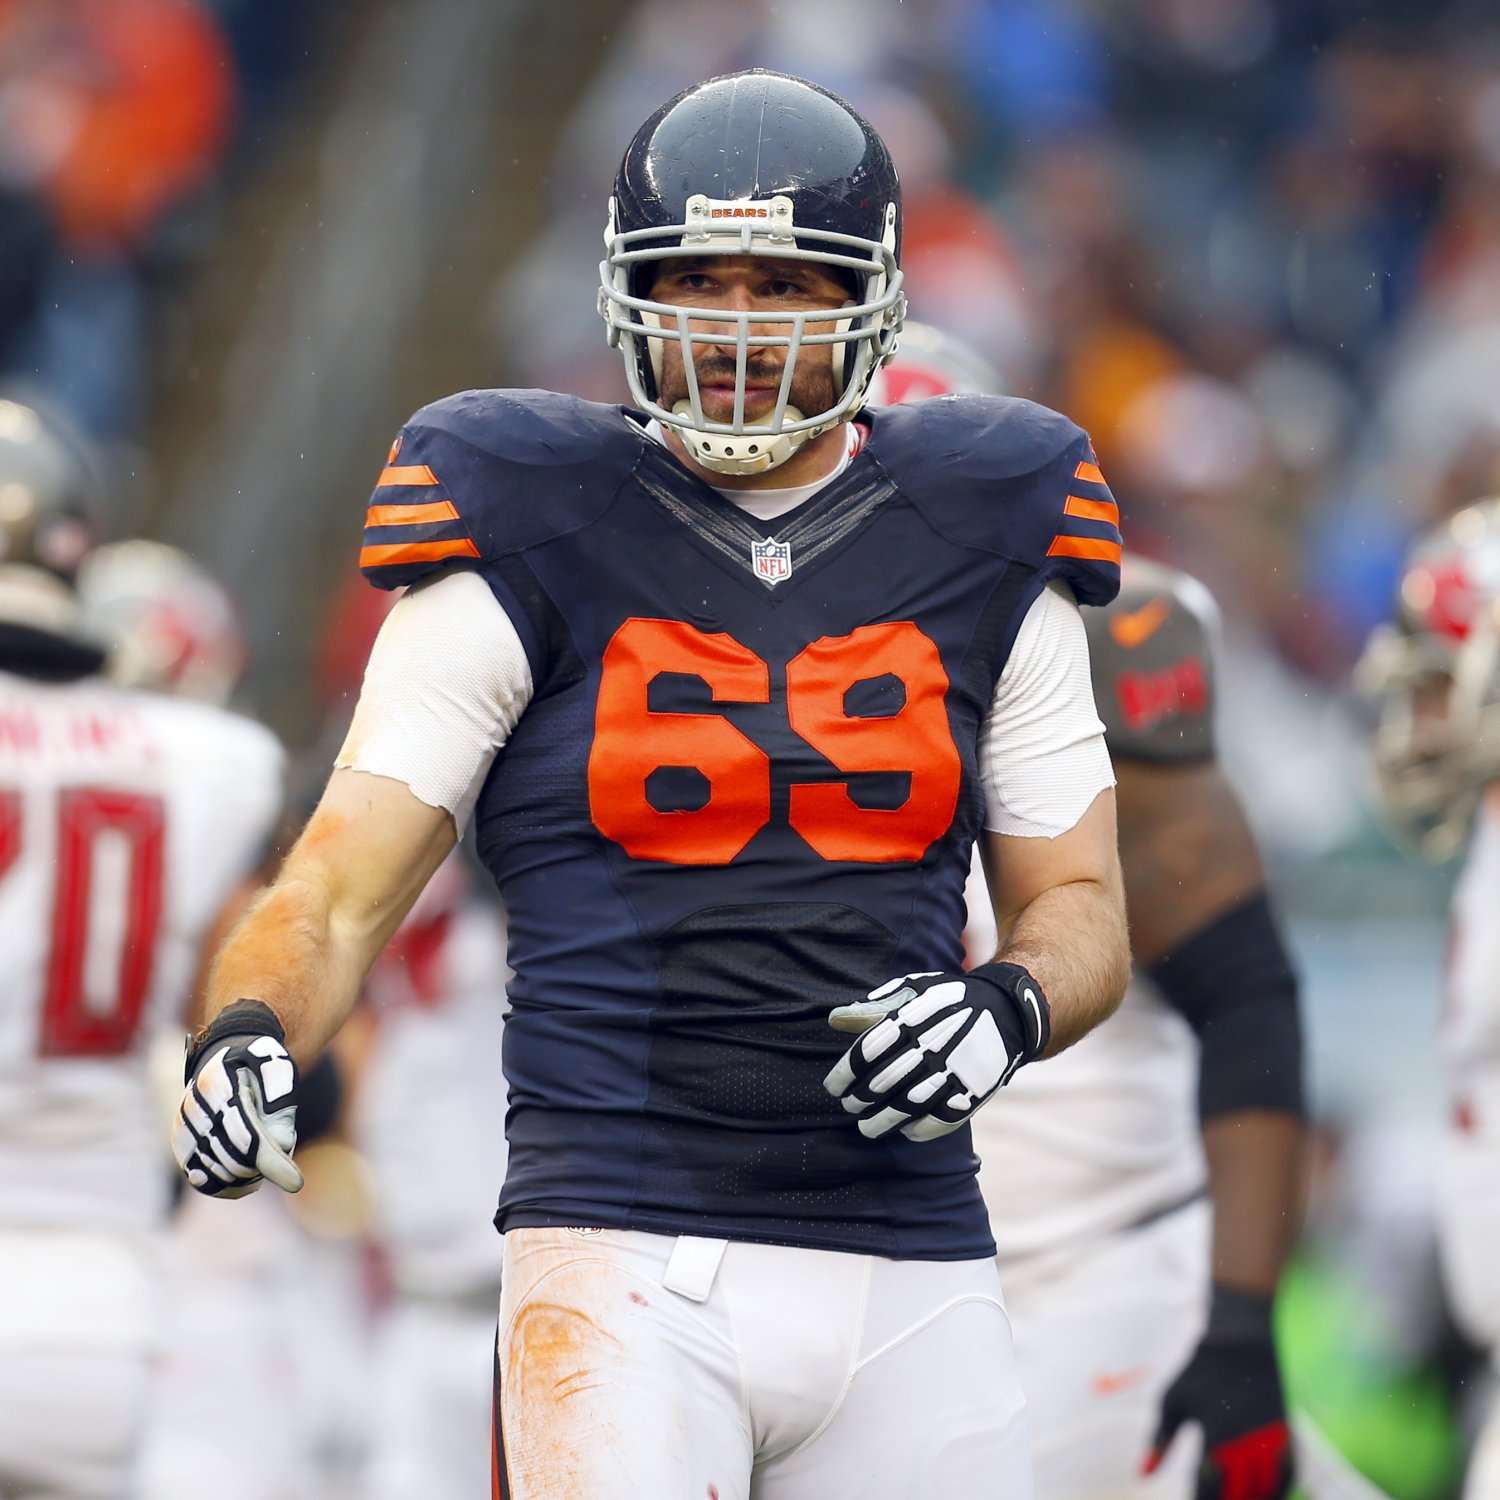 Bears' Jared Allen Just 1 Sack Away from Joining AllTime Top 10